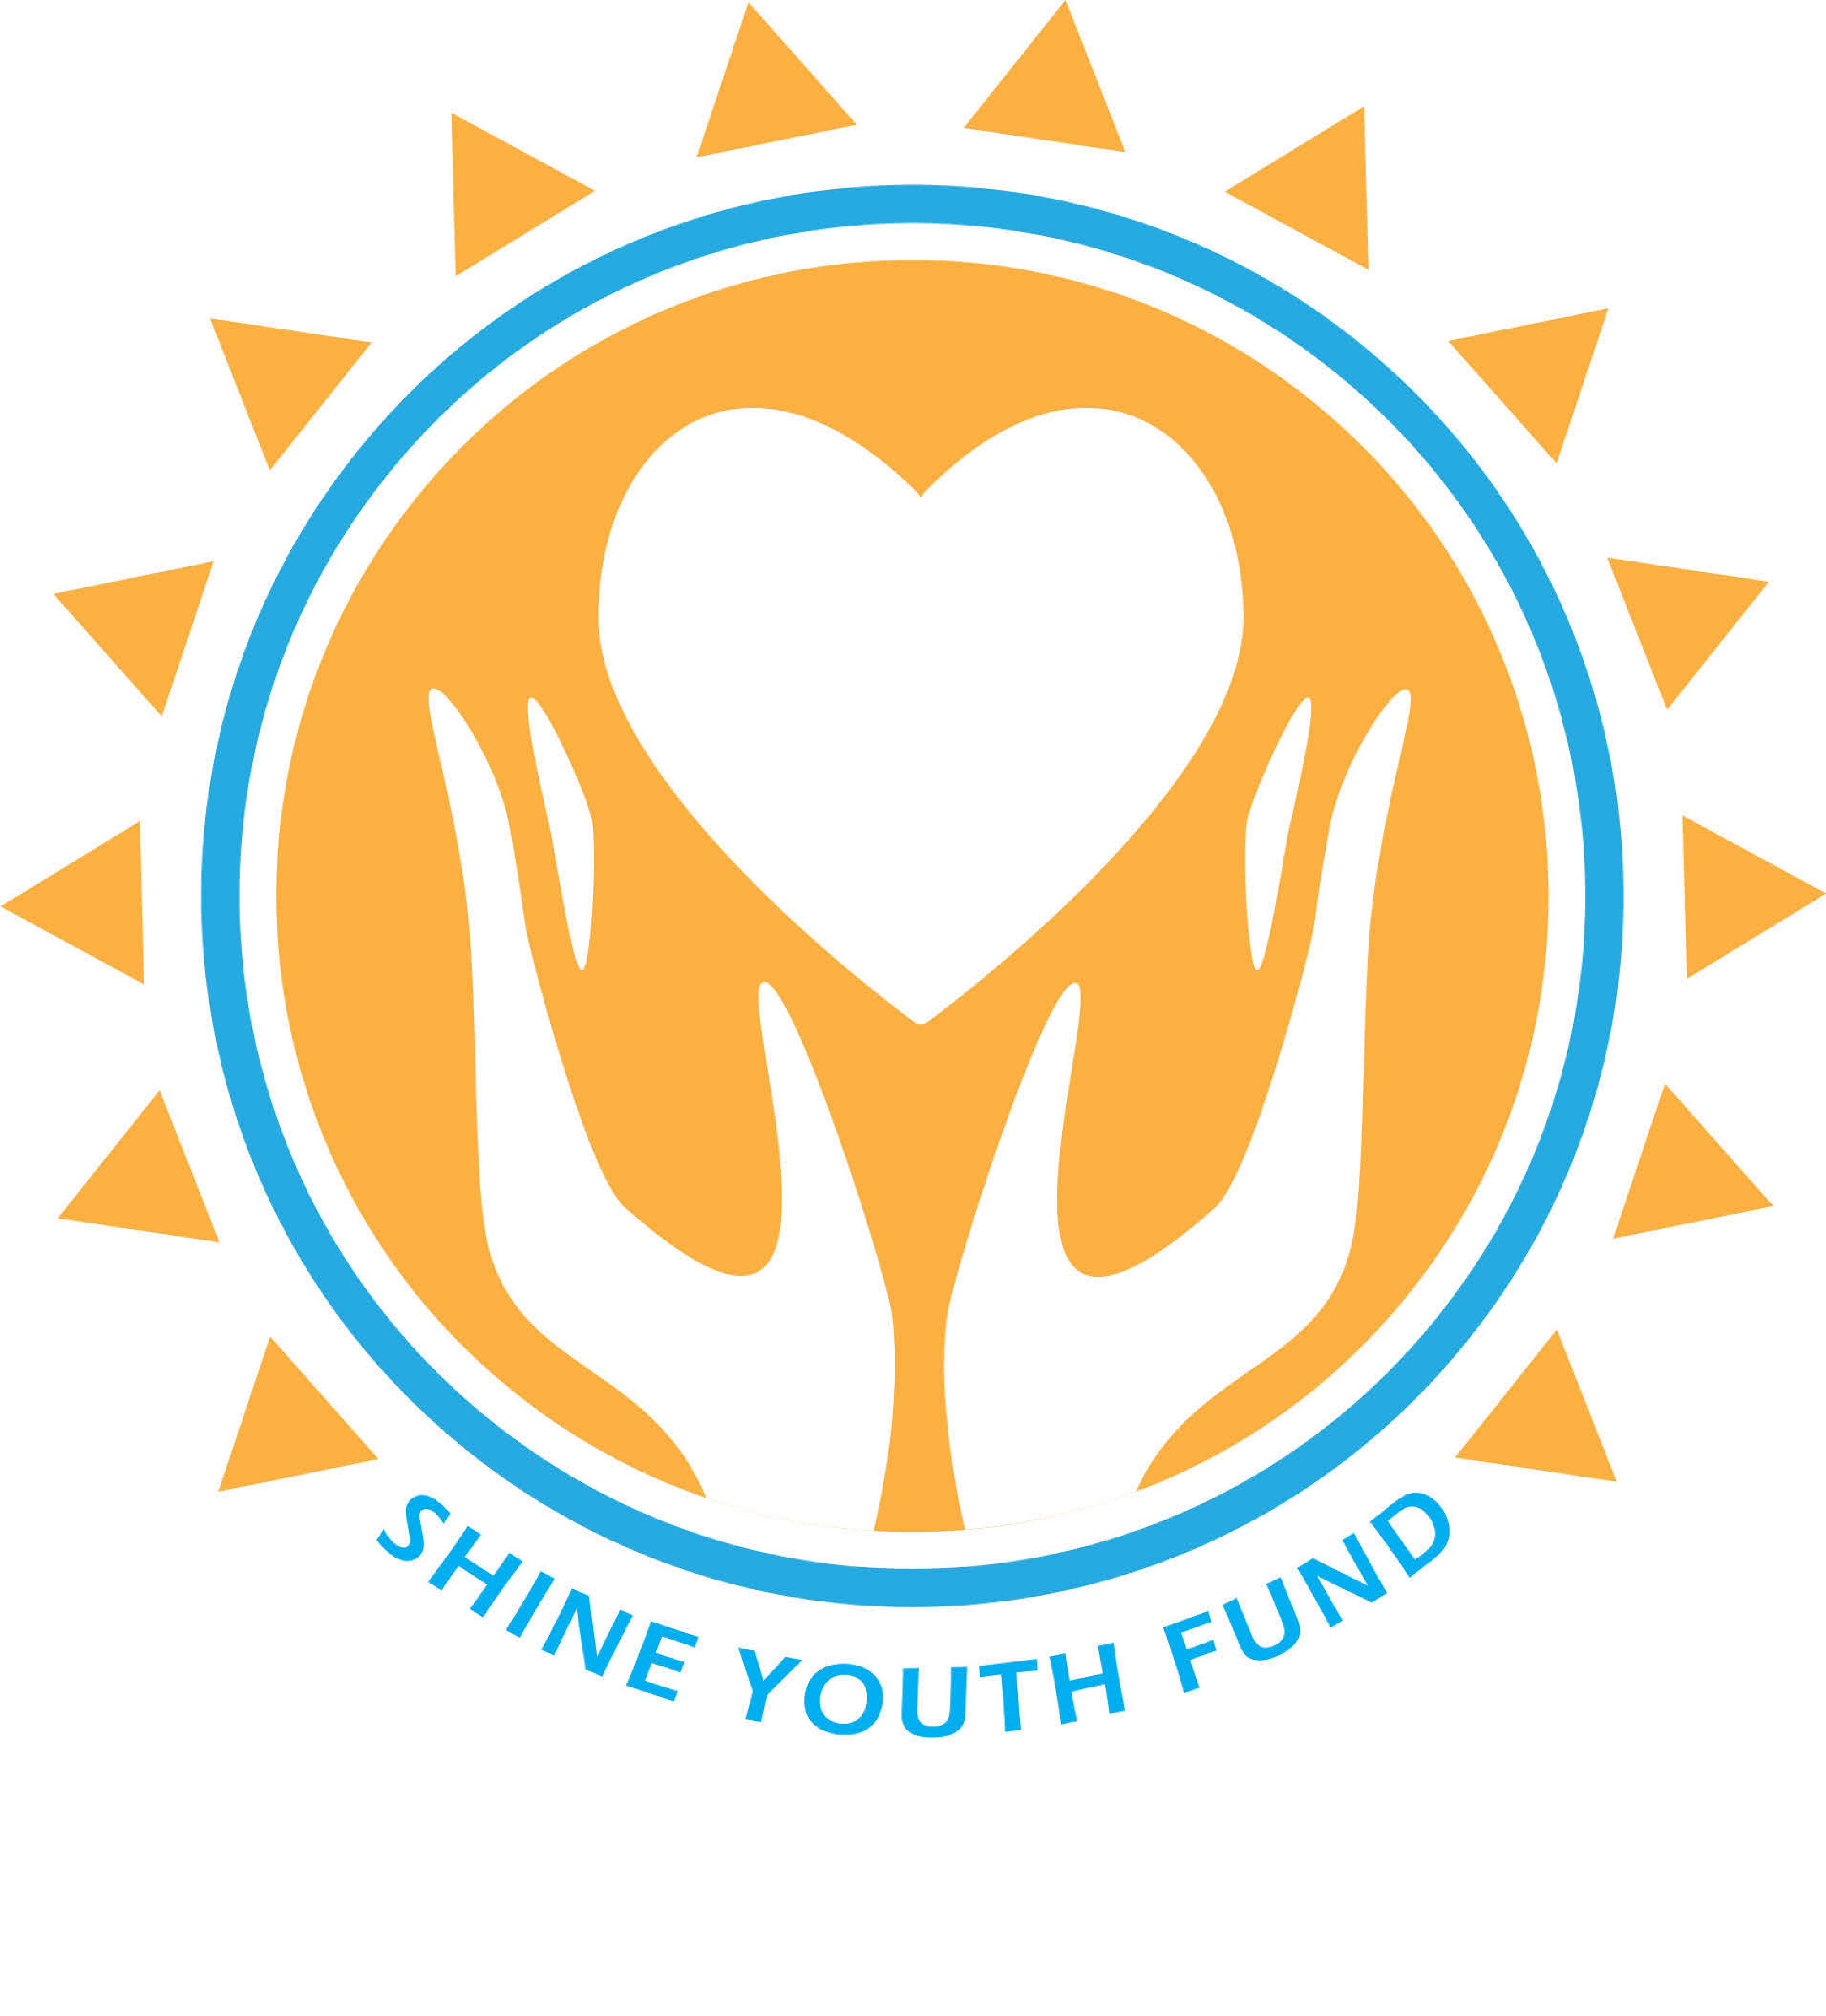 Shine Youth Fund – providing scholarship funding and accessible programs in the arts to Spokane’s youth